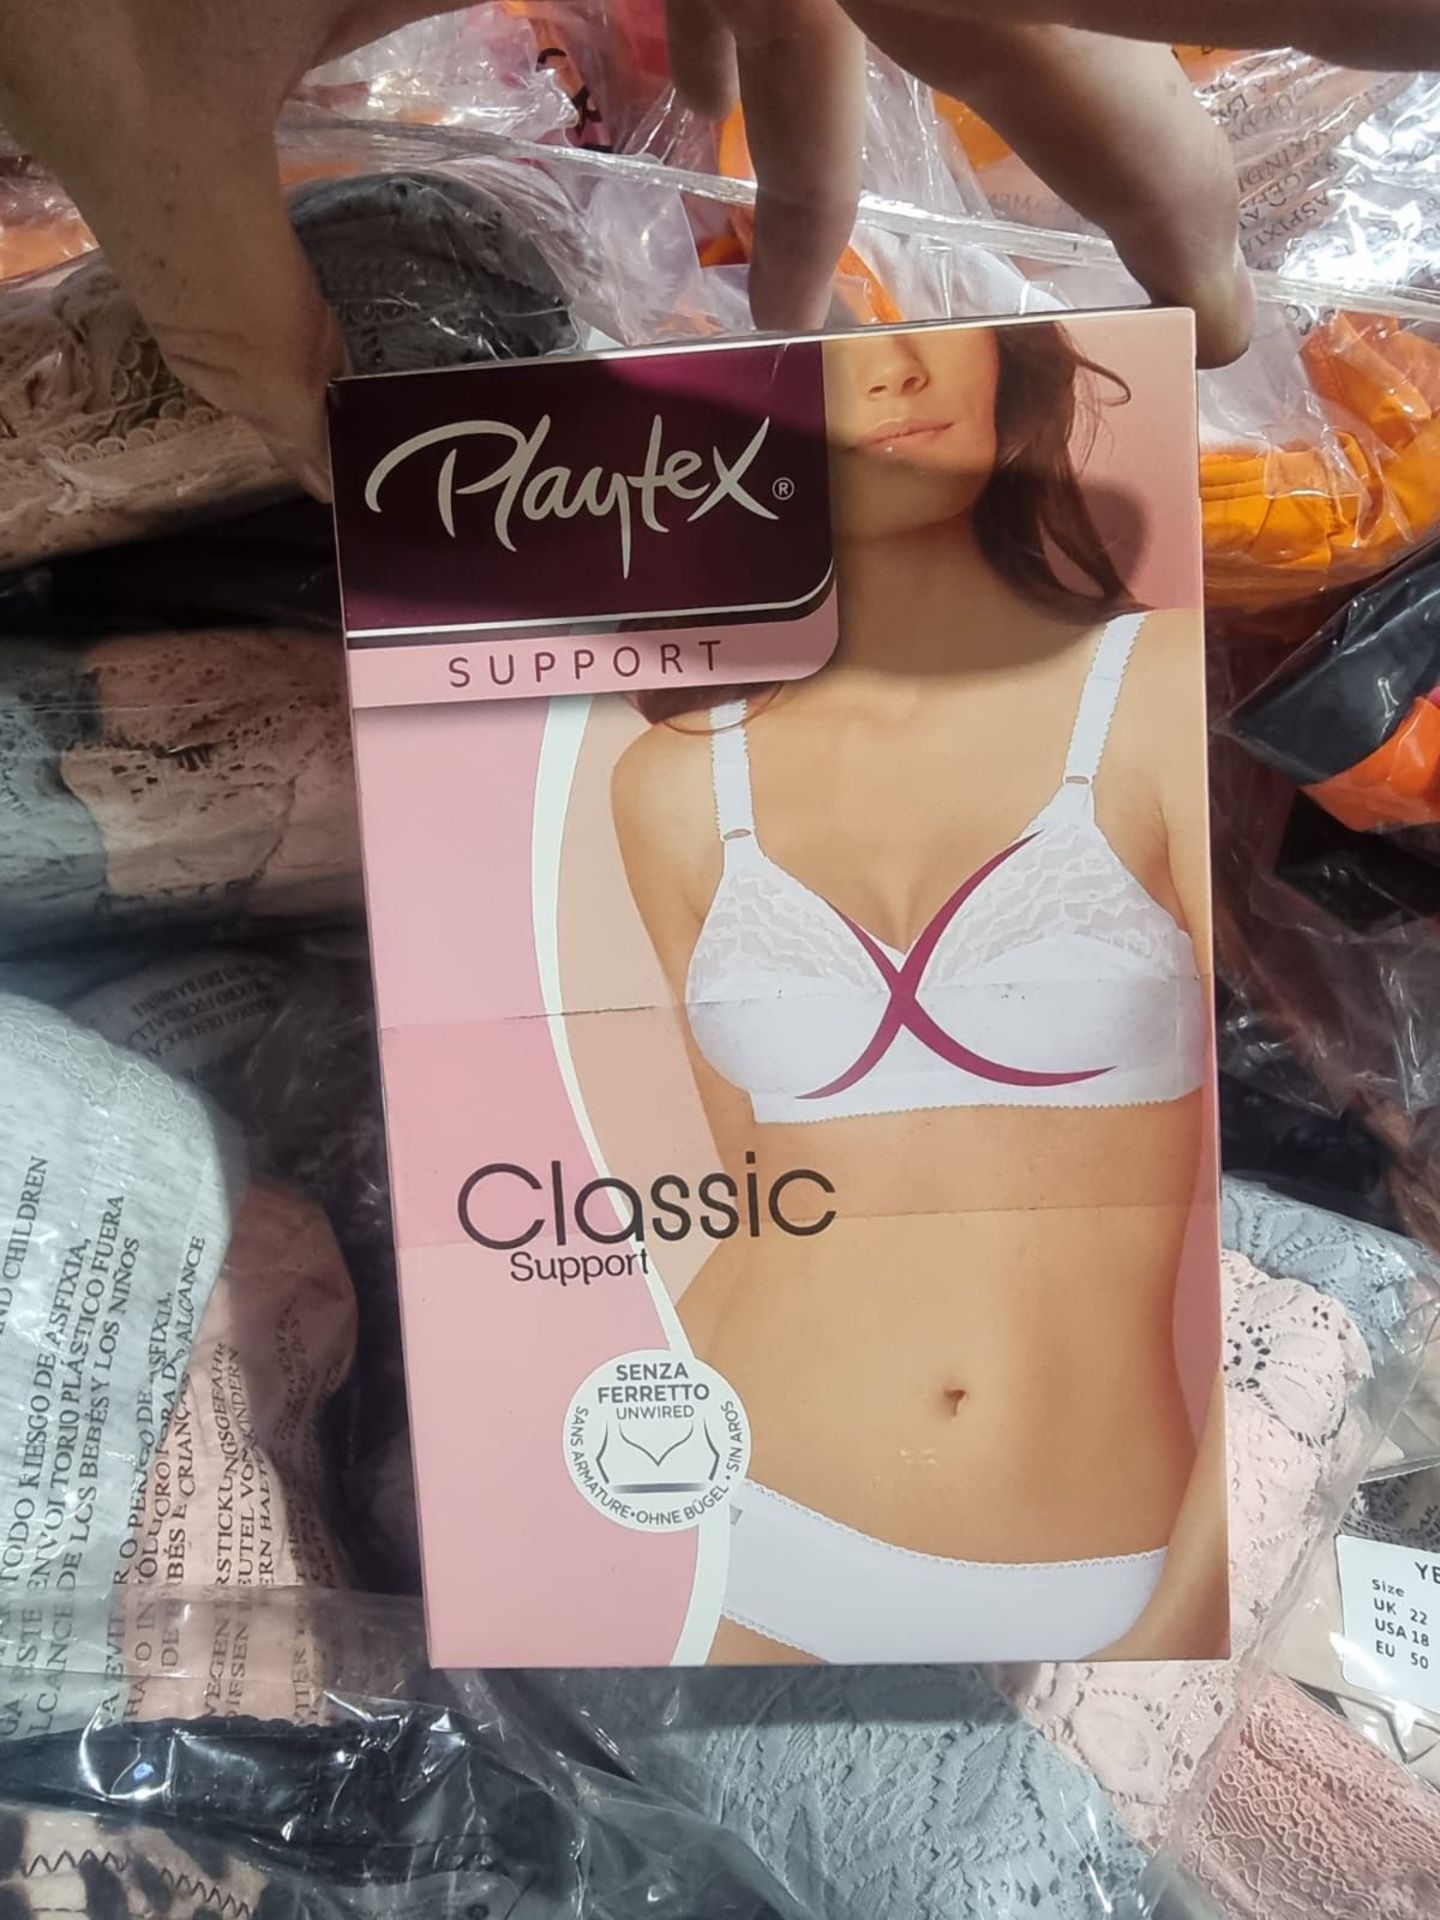 100 x NEW PACKAGED ASSORTED SWIM & UNDERWEAR FROM BRAND SUCH AS WONDERBRA, BOUX AVENUE, ANN SUMMERS, - Image 27 of 53